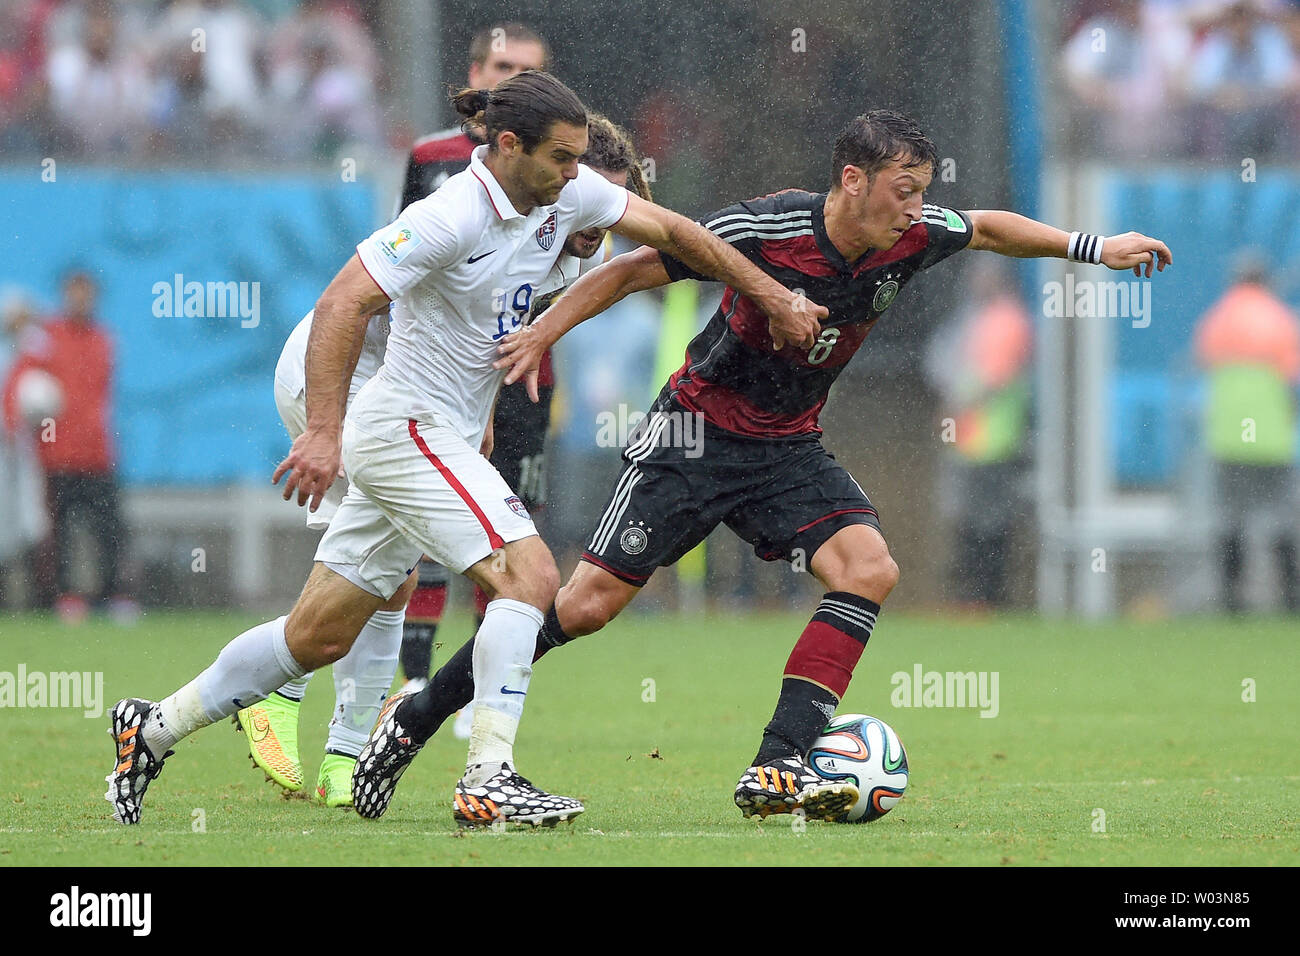 Graham Zusi (L) of USA challenges Mesut Ozil of Germany during the 2014 FIFA World Cup Group G match at the Arena Pernambuco in Recife, Brazil on June 26, 2014. UPI/Chris Brunskill Stock Photo